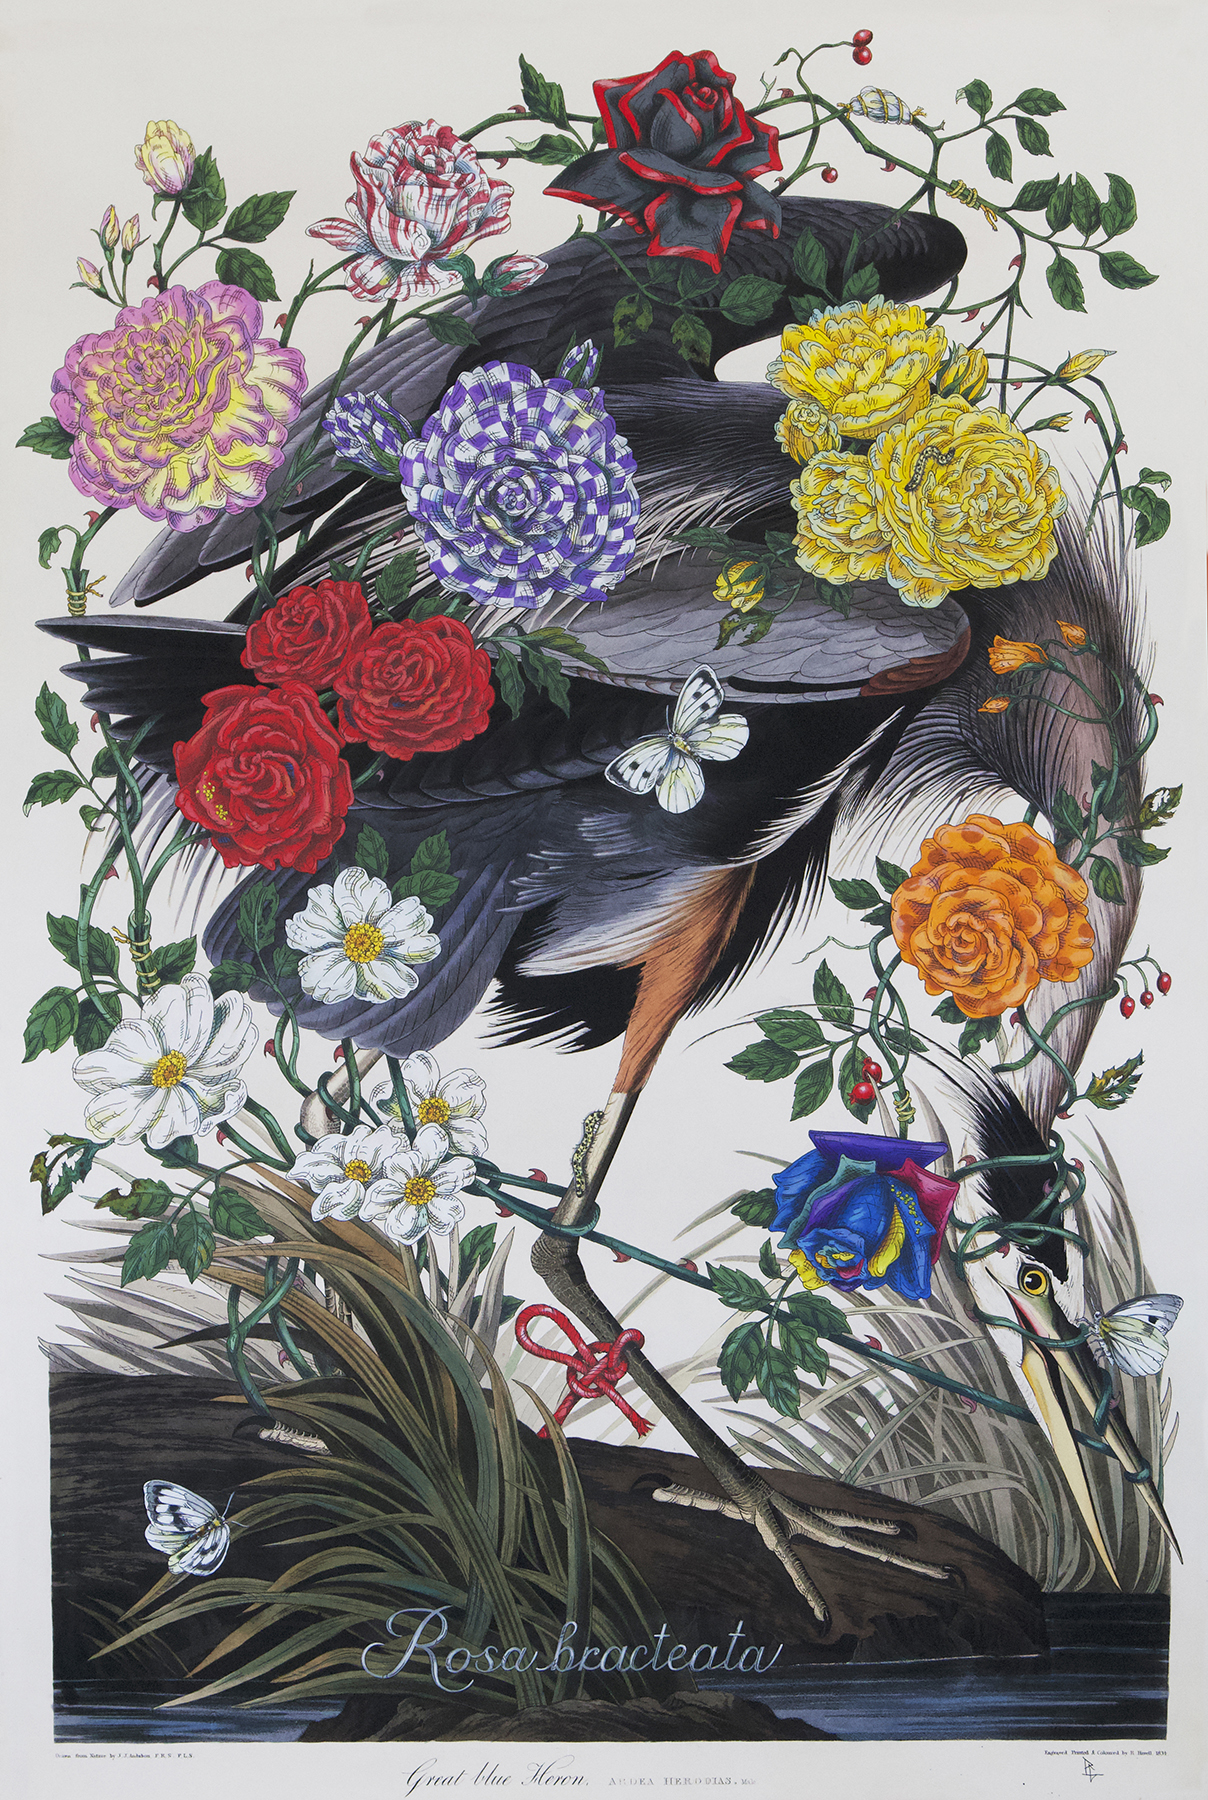 
		                					Penelope Gottlieb		                																	
																											<i>Rosa bracteata,</i>  
																																								2022, 
																																								acrylic and ink over a digital reproduction of an Audubon print, 
																																								38 x 26 inches 
																								
		                				